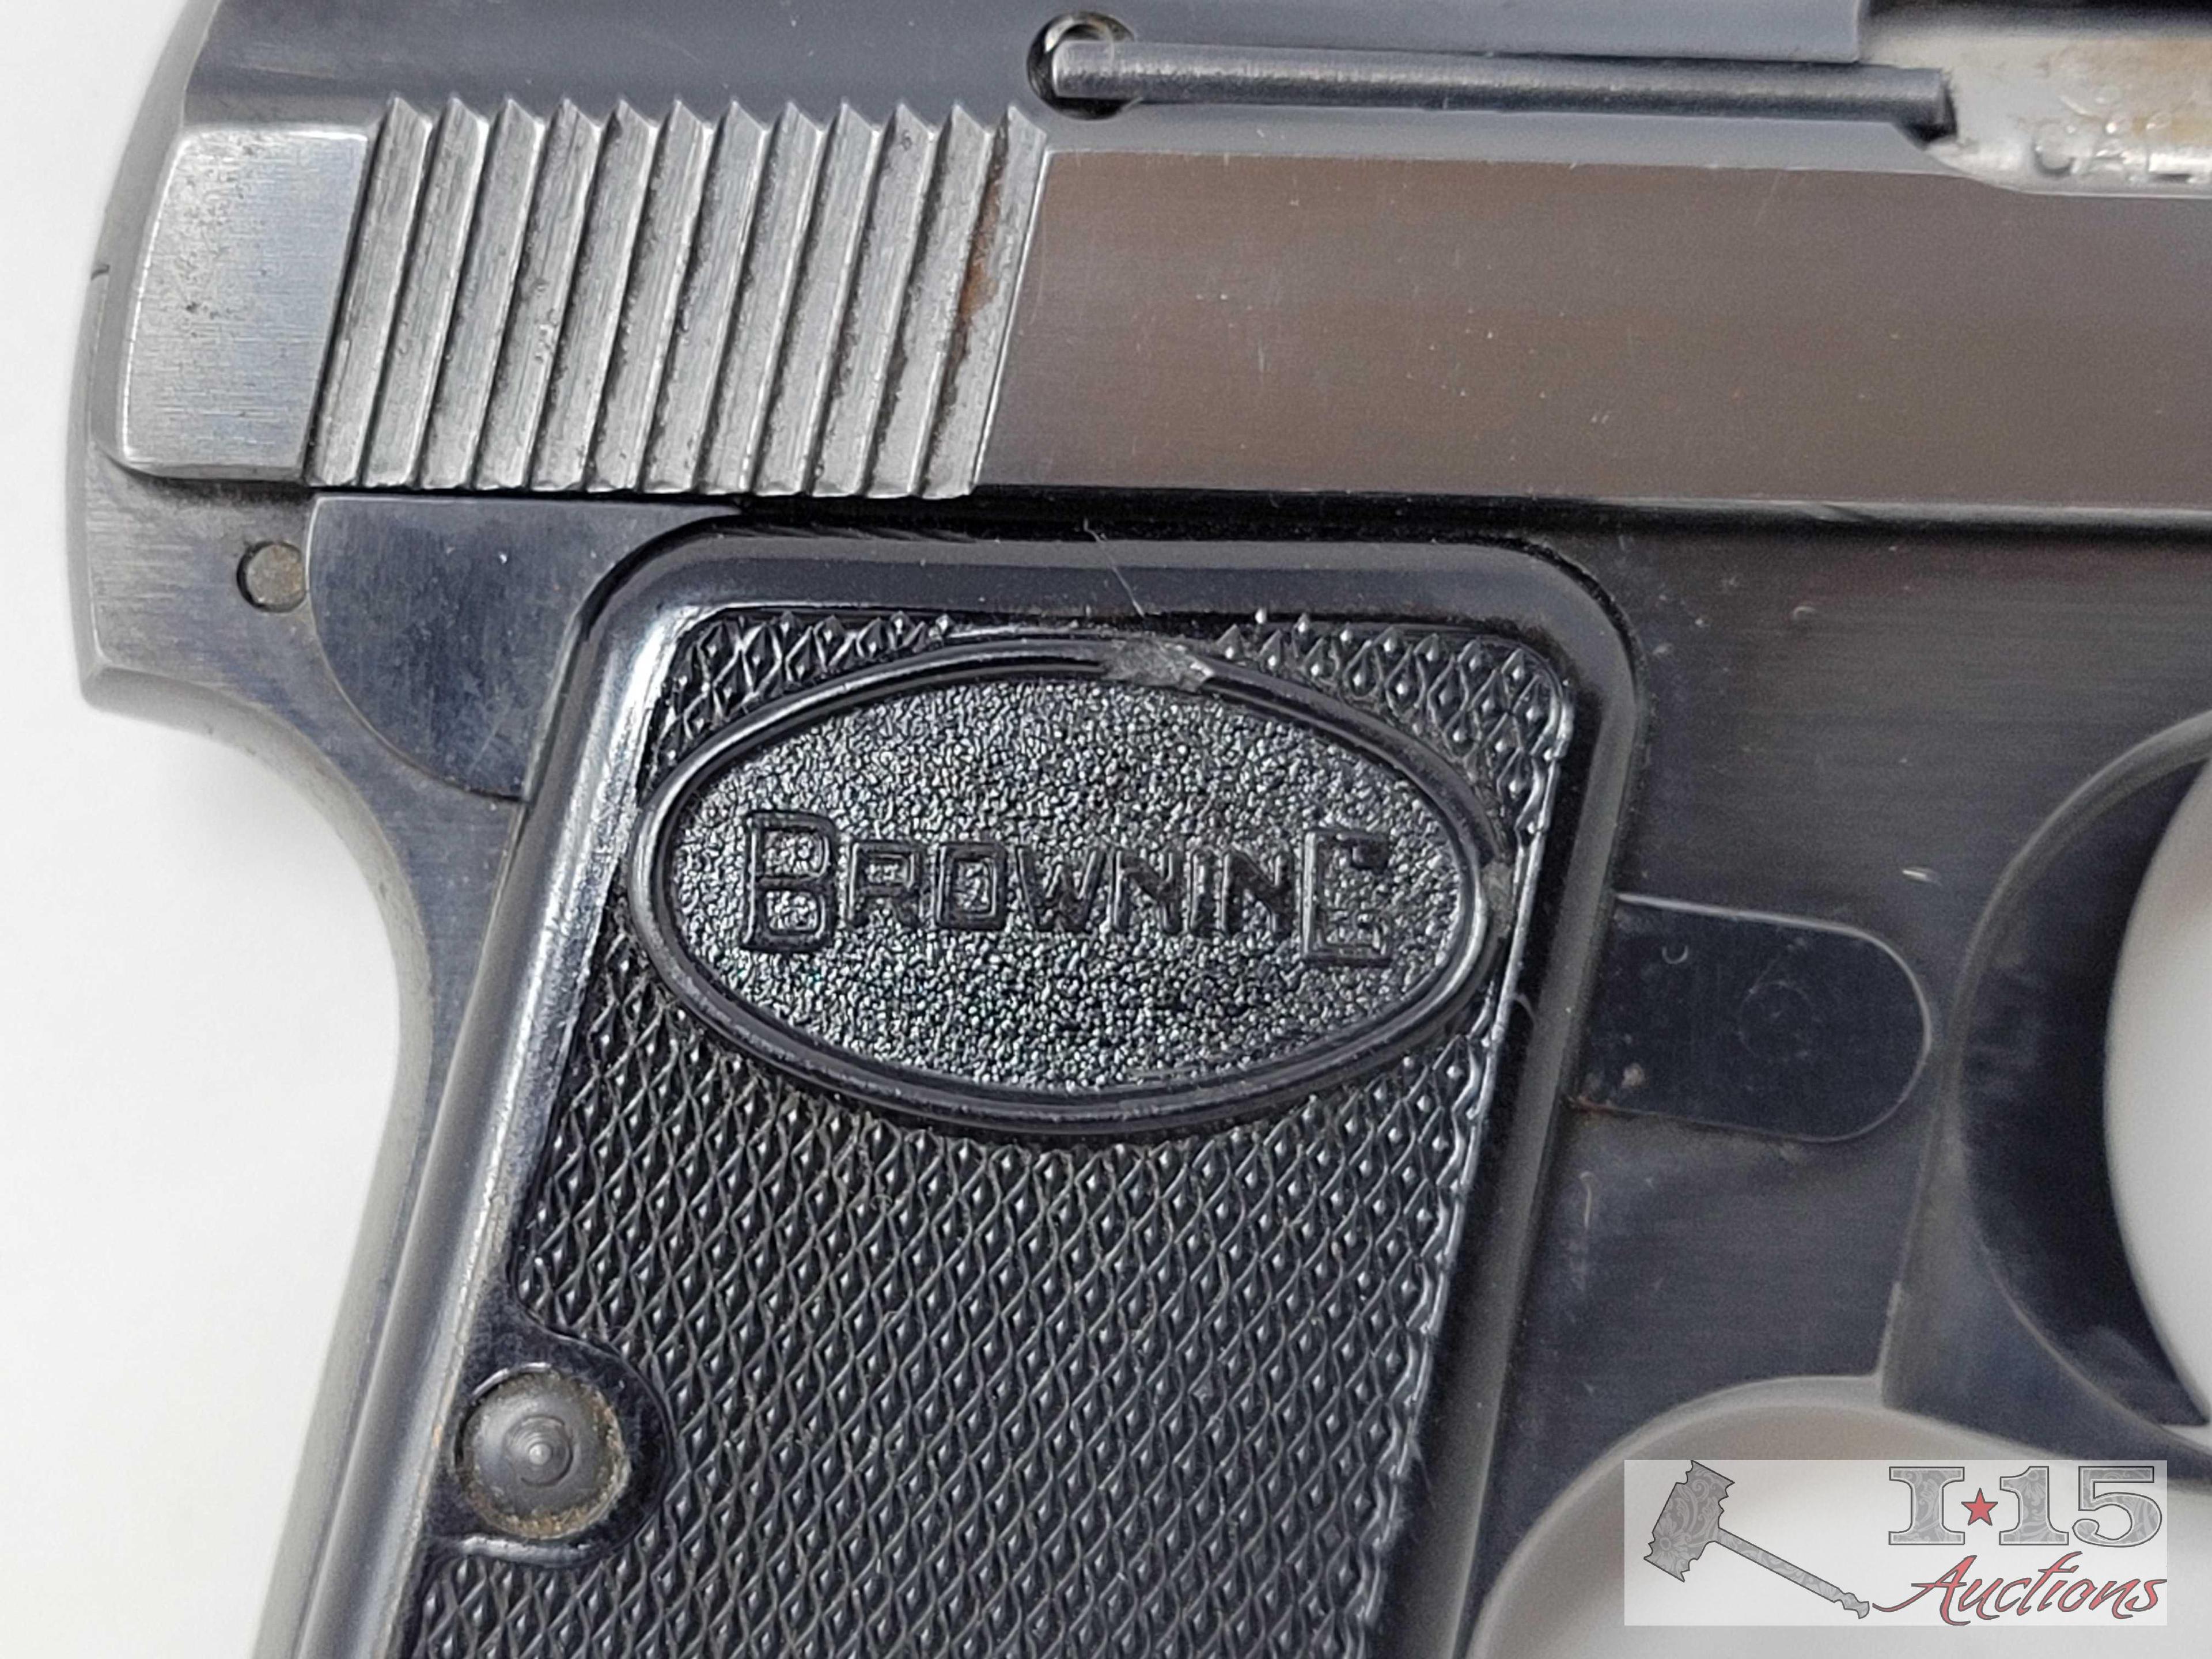 Browning Baby Browning 6 M/M Semi-Auto Pistol